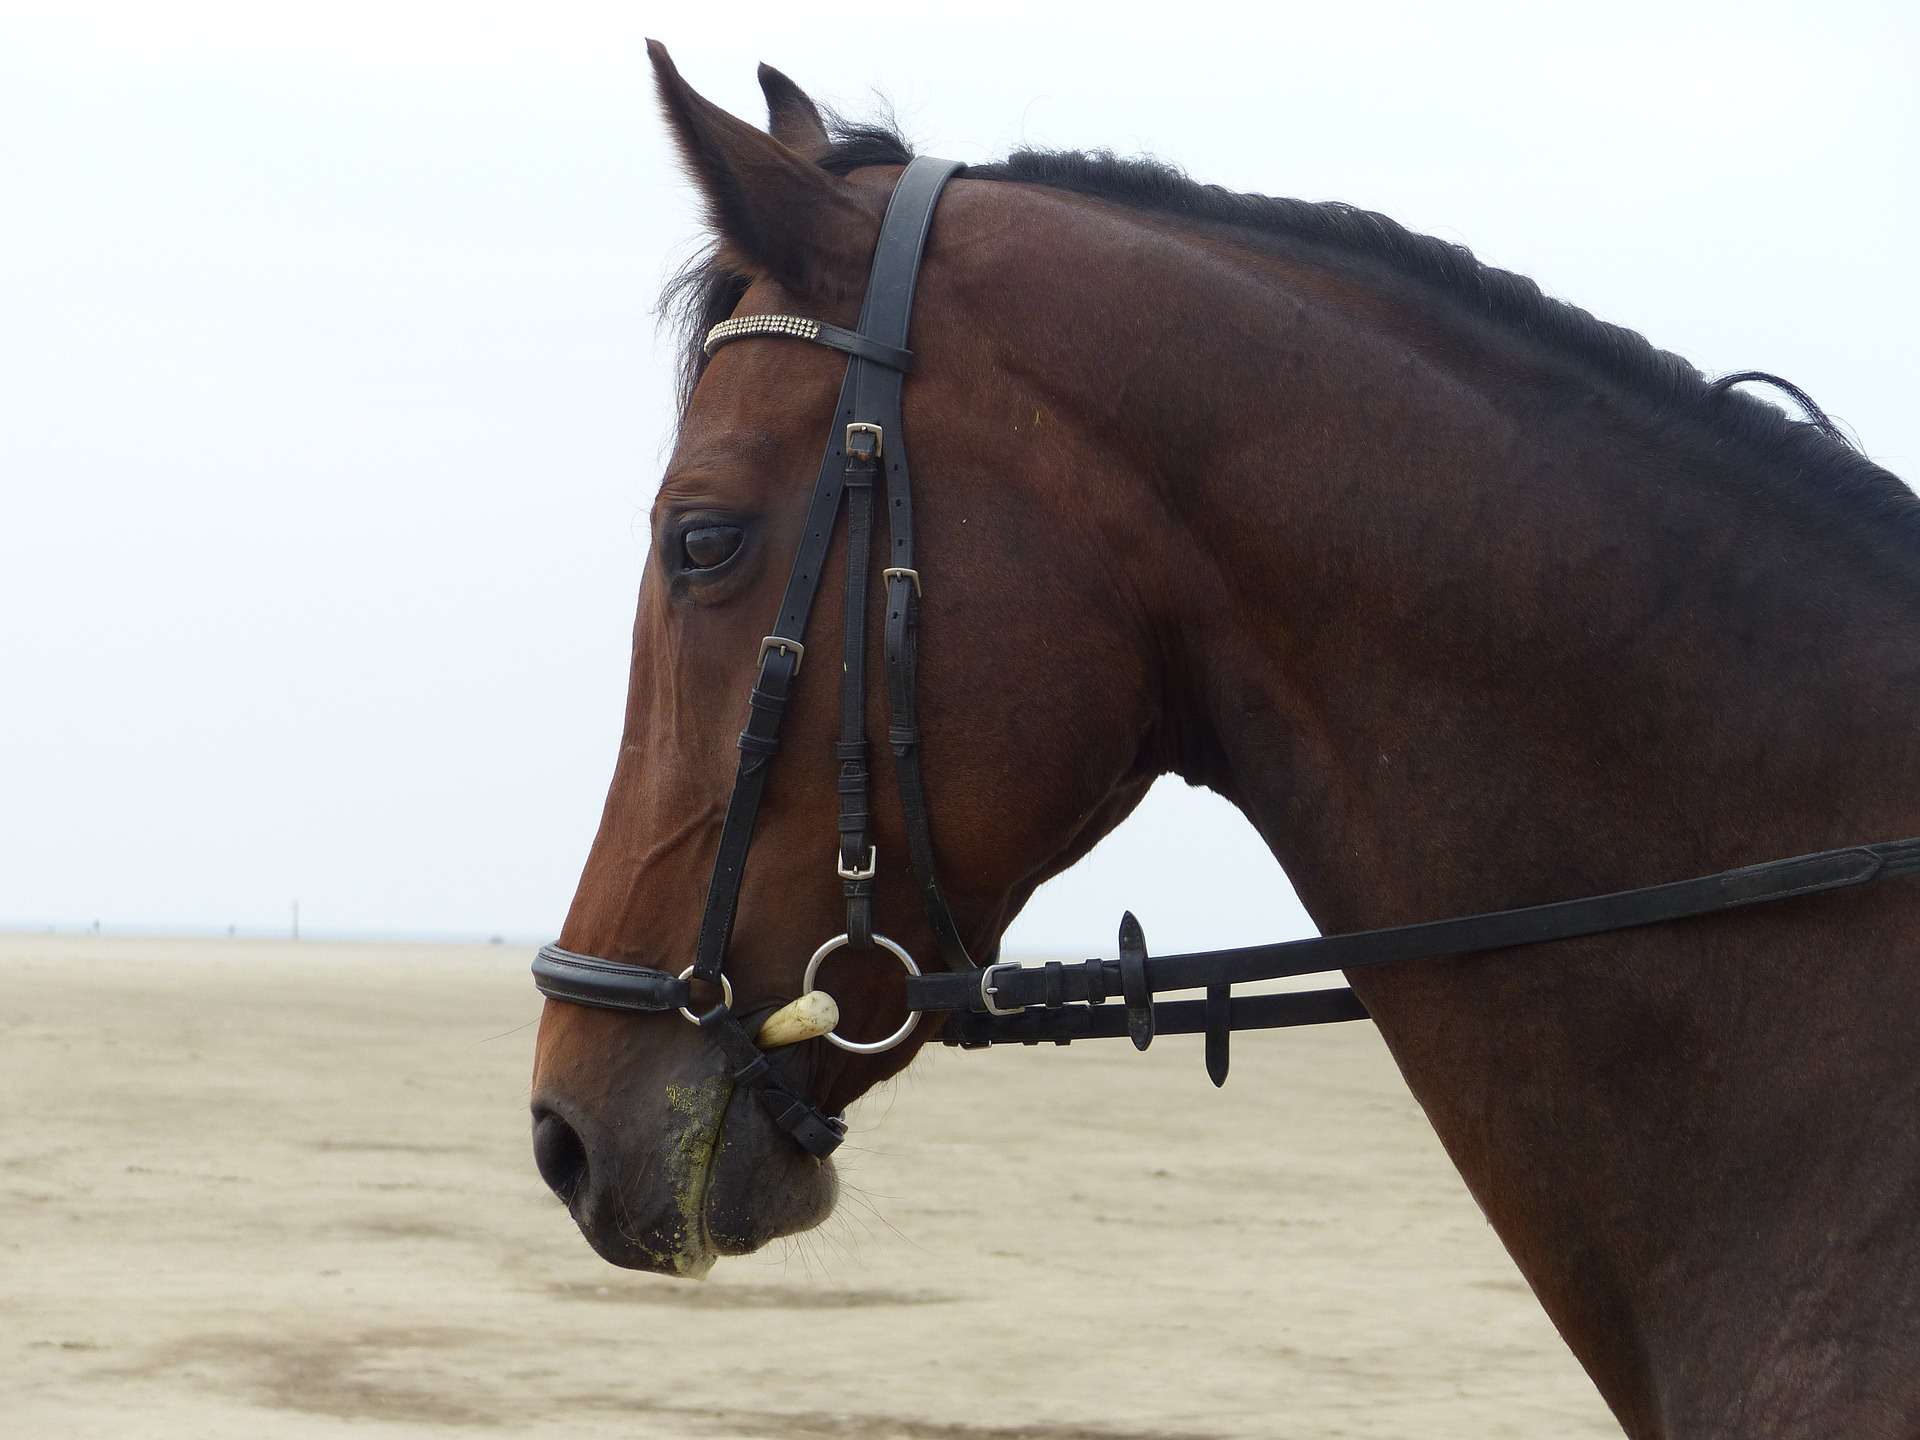 An English bridle on a horse.